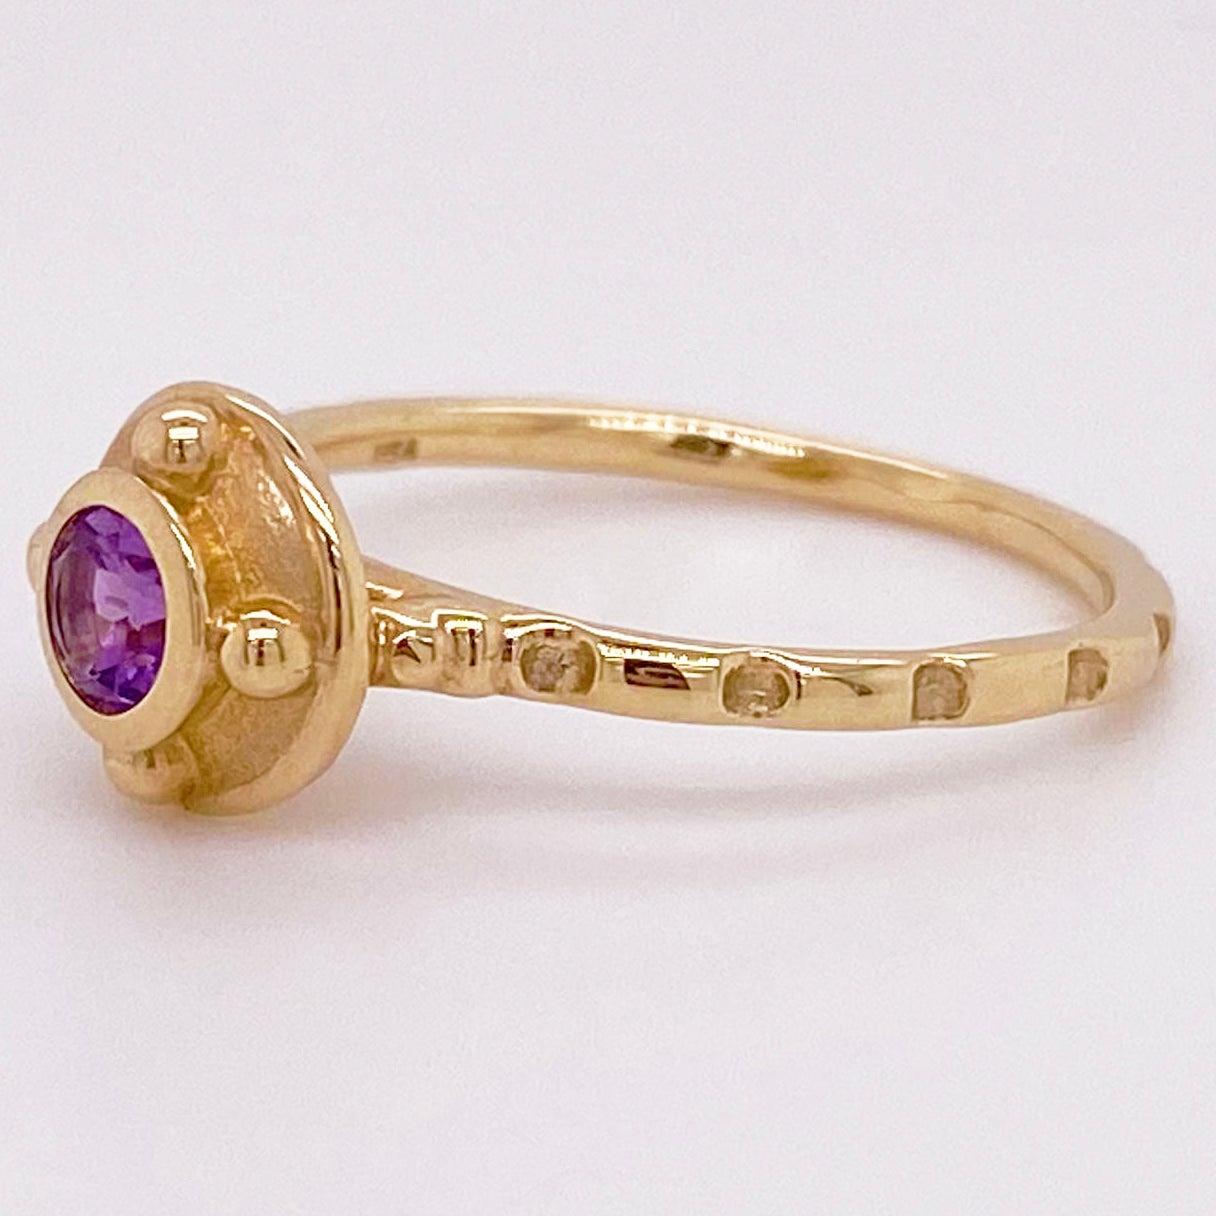 For Sale:  Amethyst Solitaire Ring, Yellow Gold, Round, Purple, Stackable, Bezel, February 3